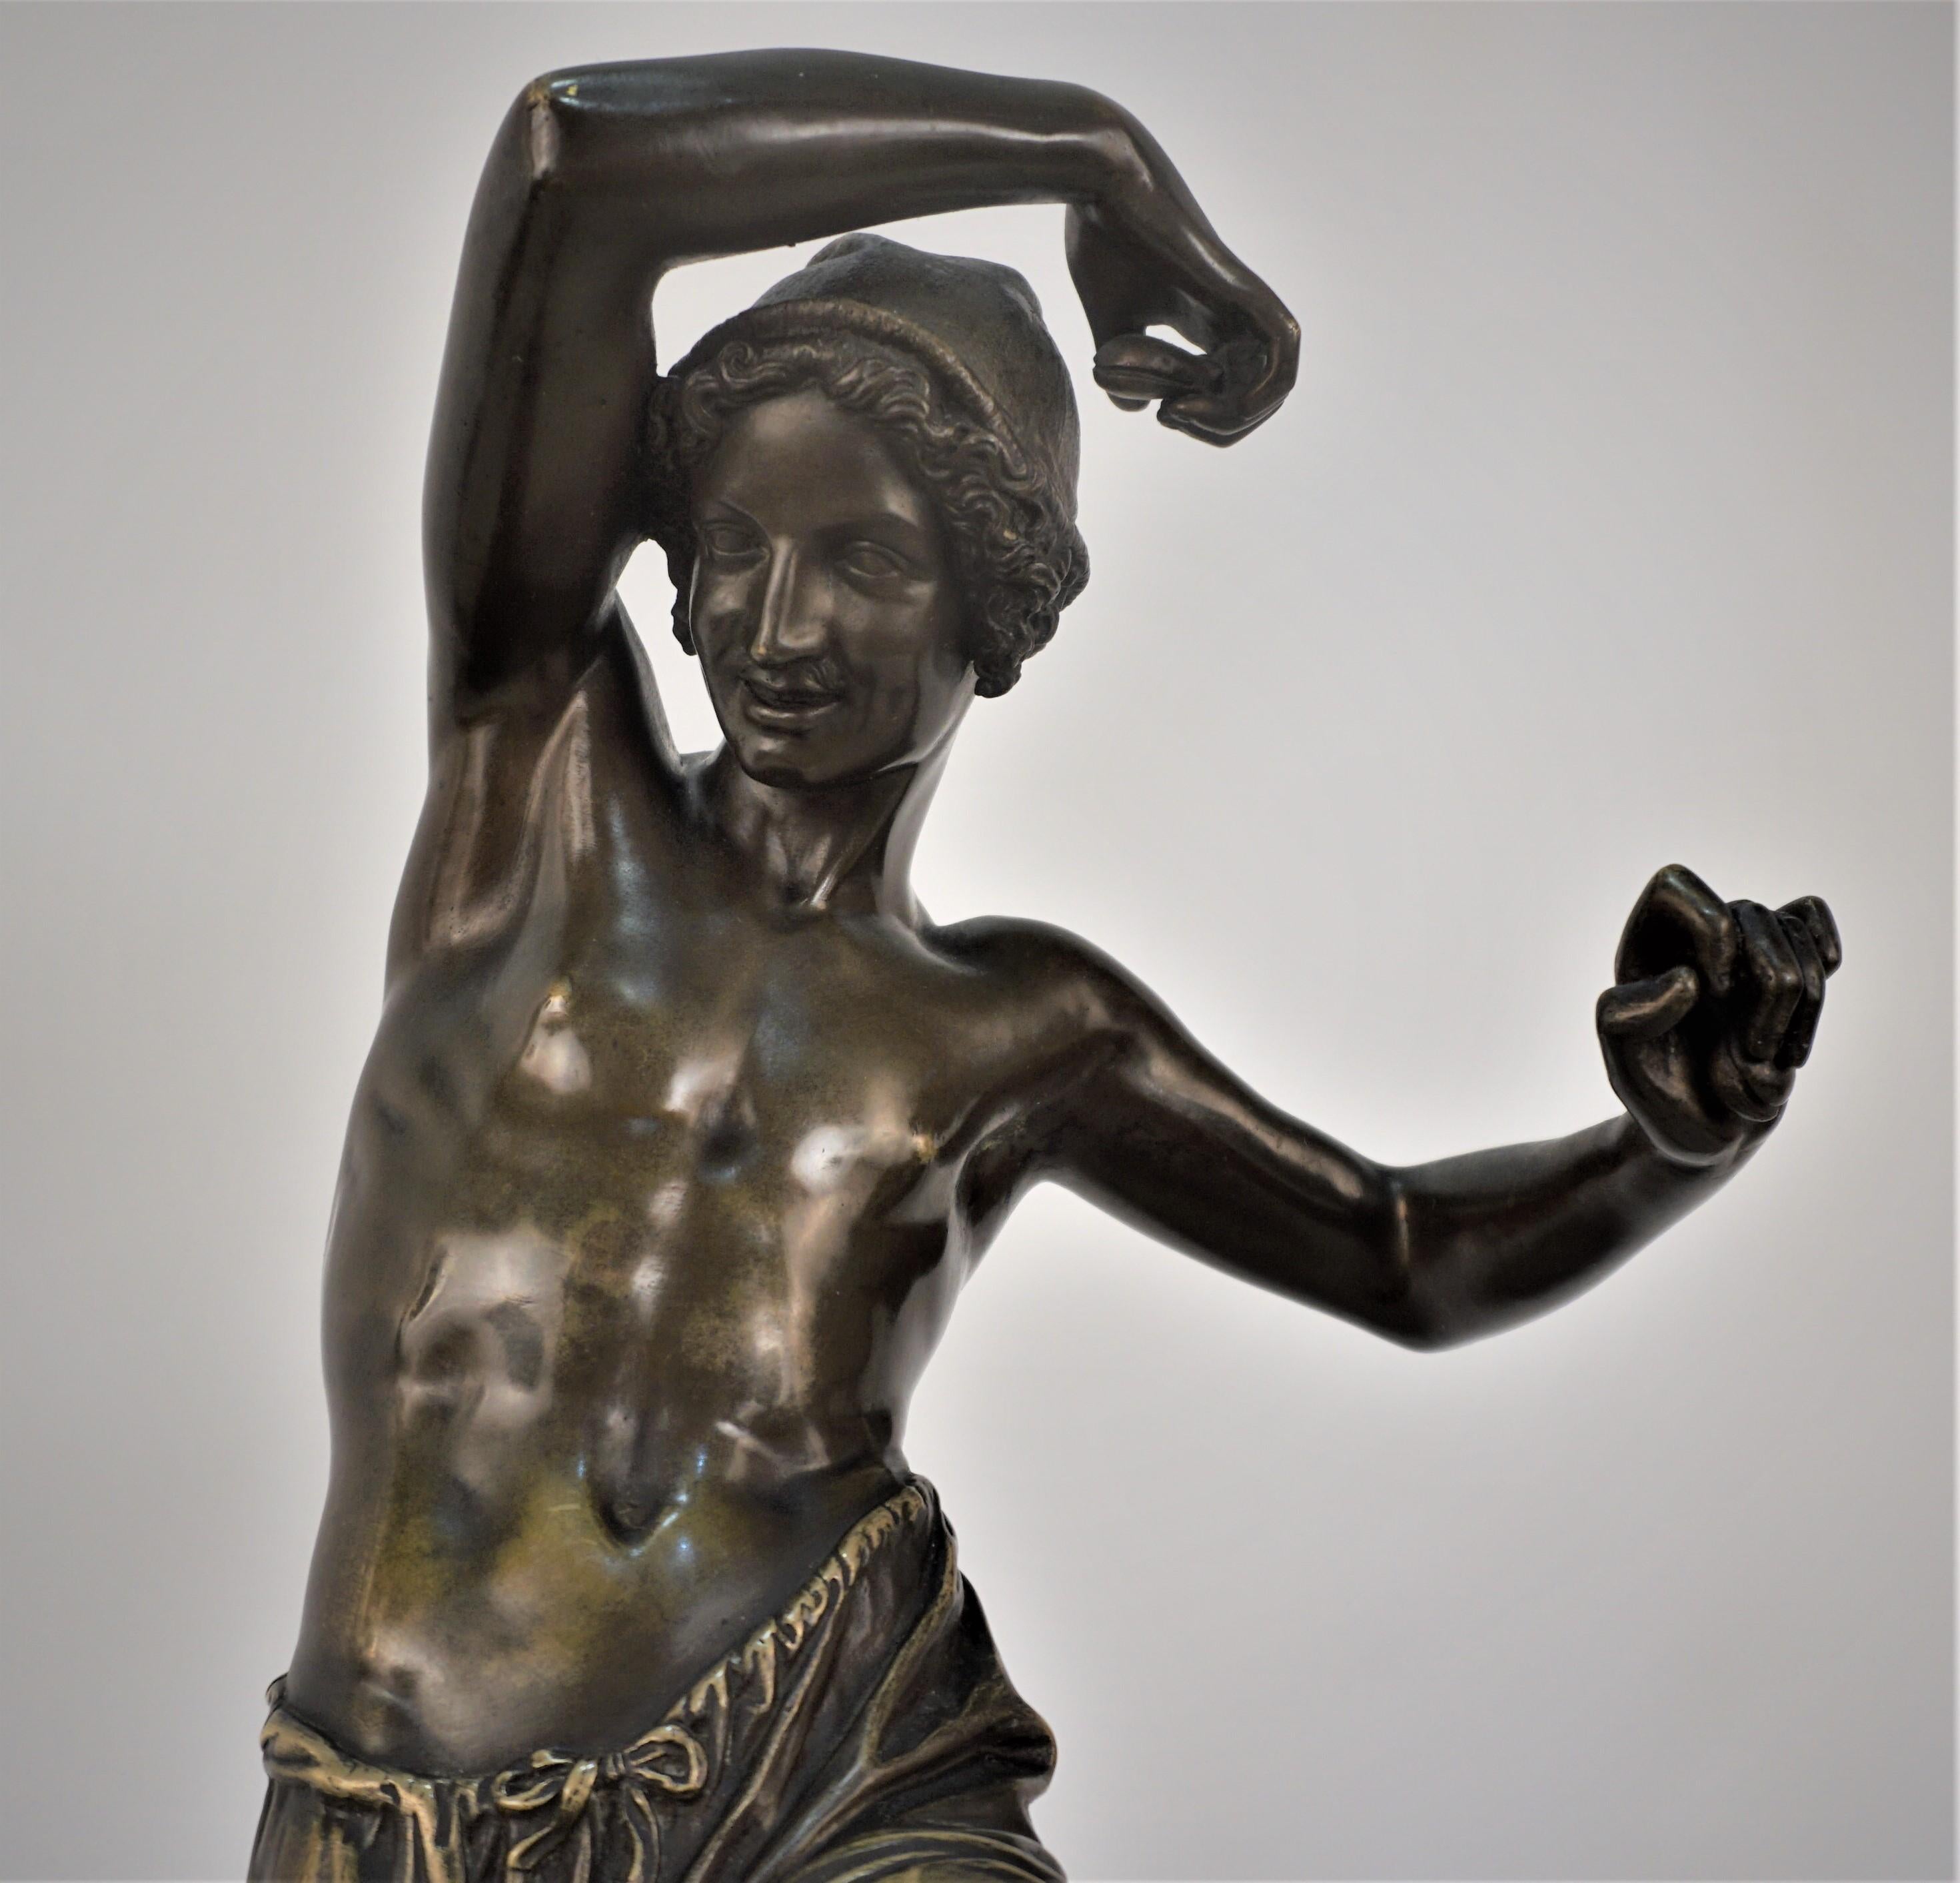 Bronze Neapolitan dancer with castanets, marked Duret F.
After Francisque Joseph Duret (French, 1805-1865)
Cast by Delafontaine from a mold by Francisque Joseph Duret.